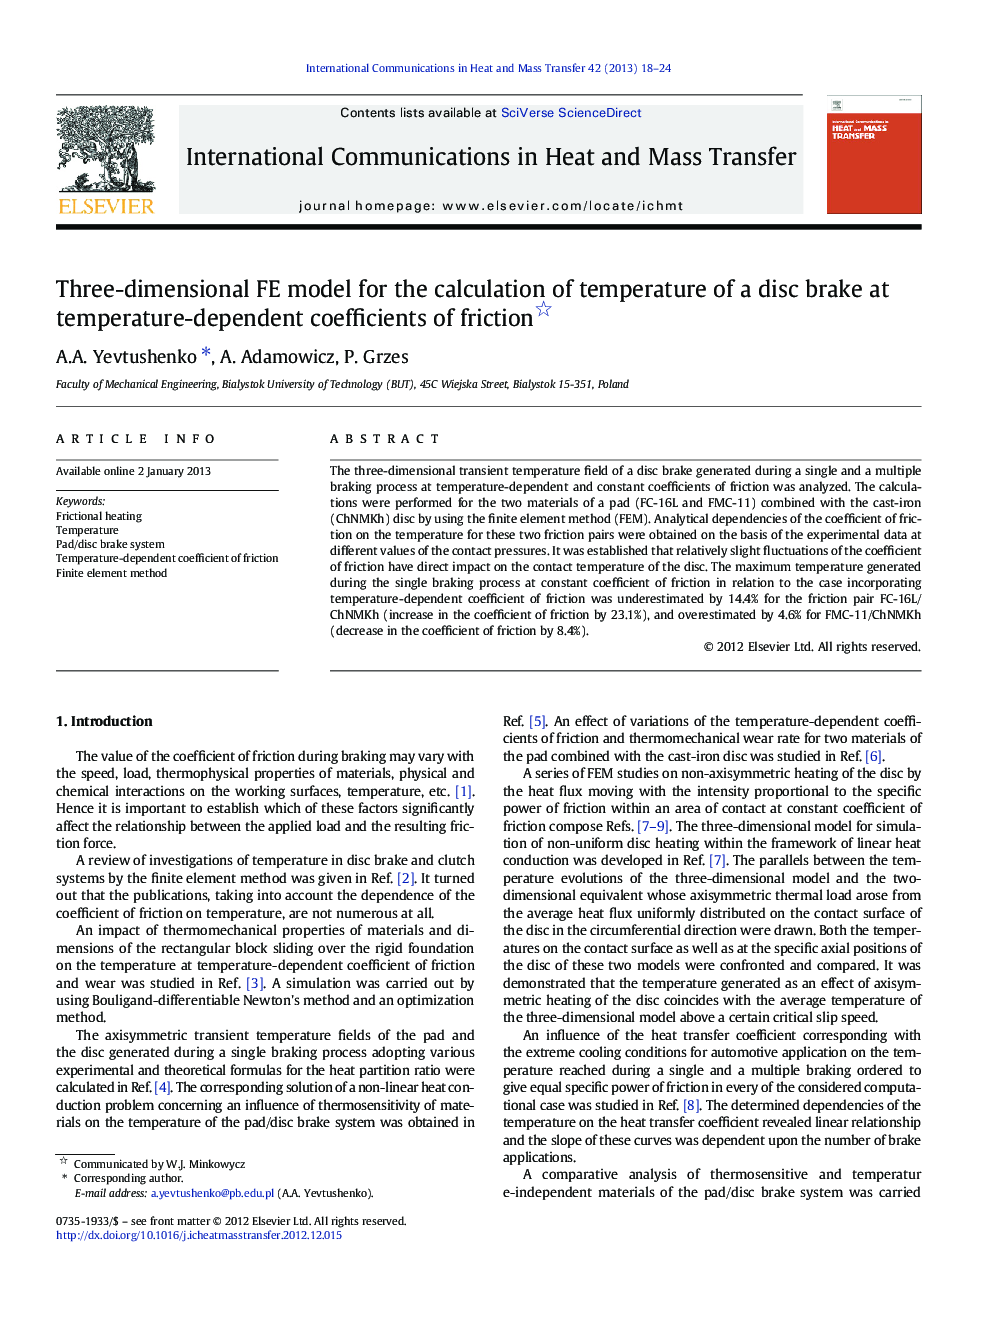 Three-dimensional FE model for the calculation of temperature of a disc brake at temperature-dependent coefficients of friction 